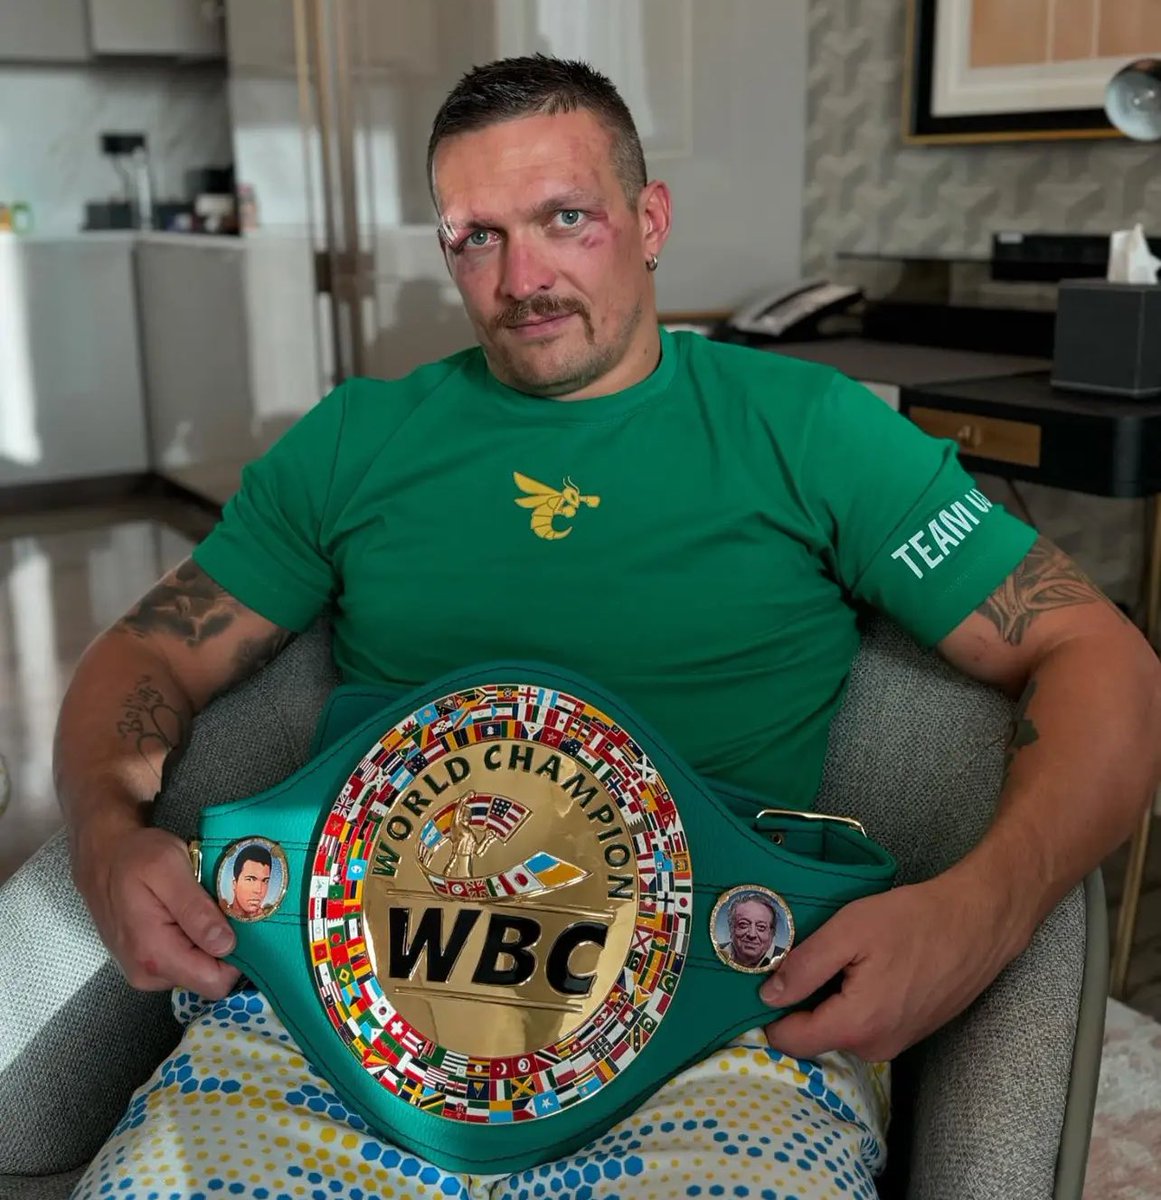 A few words from me about the Usyk-Fury fight. I don't usually watch boxing, but this fight was legendary. Tonight, Oleksandr Usyk won another - and obviously his main - victory. He became the first absolute world heavyweight champion in the 21st century. ◾️ Sometimes you can